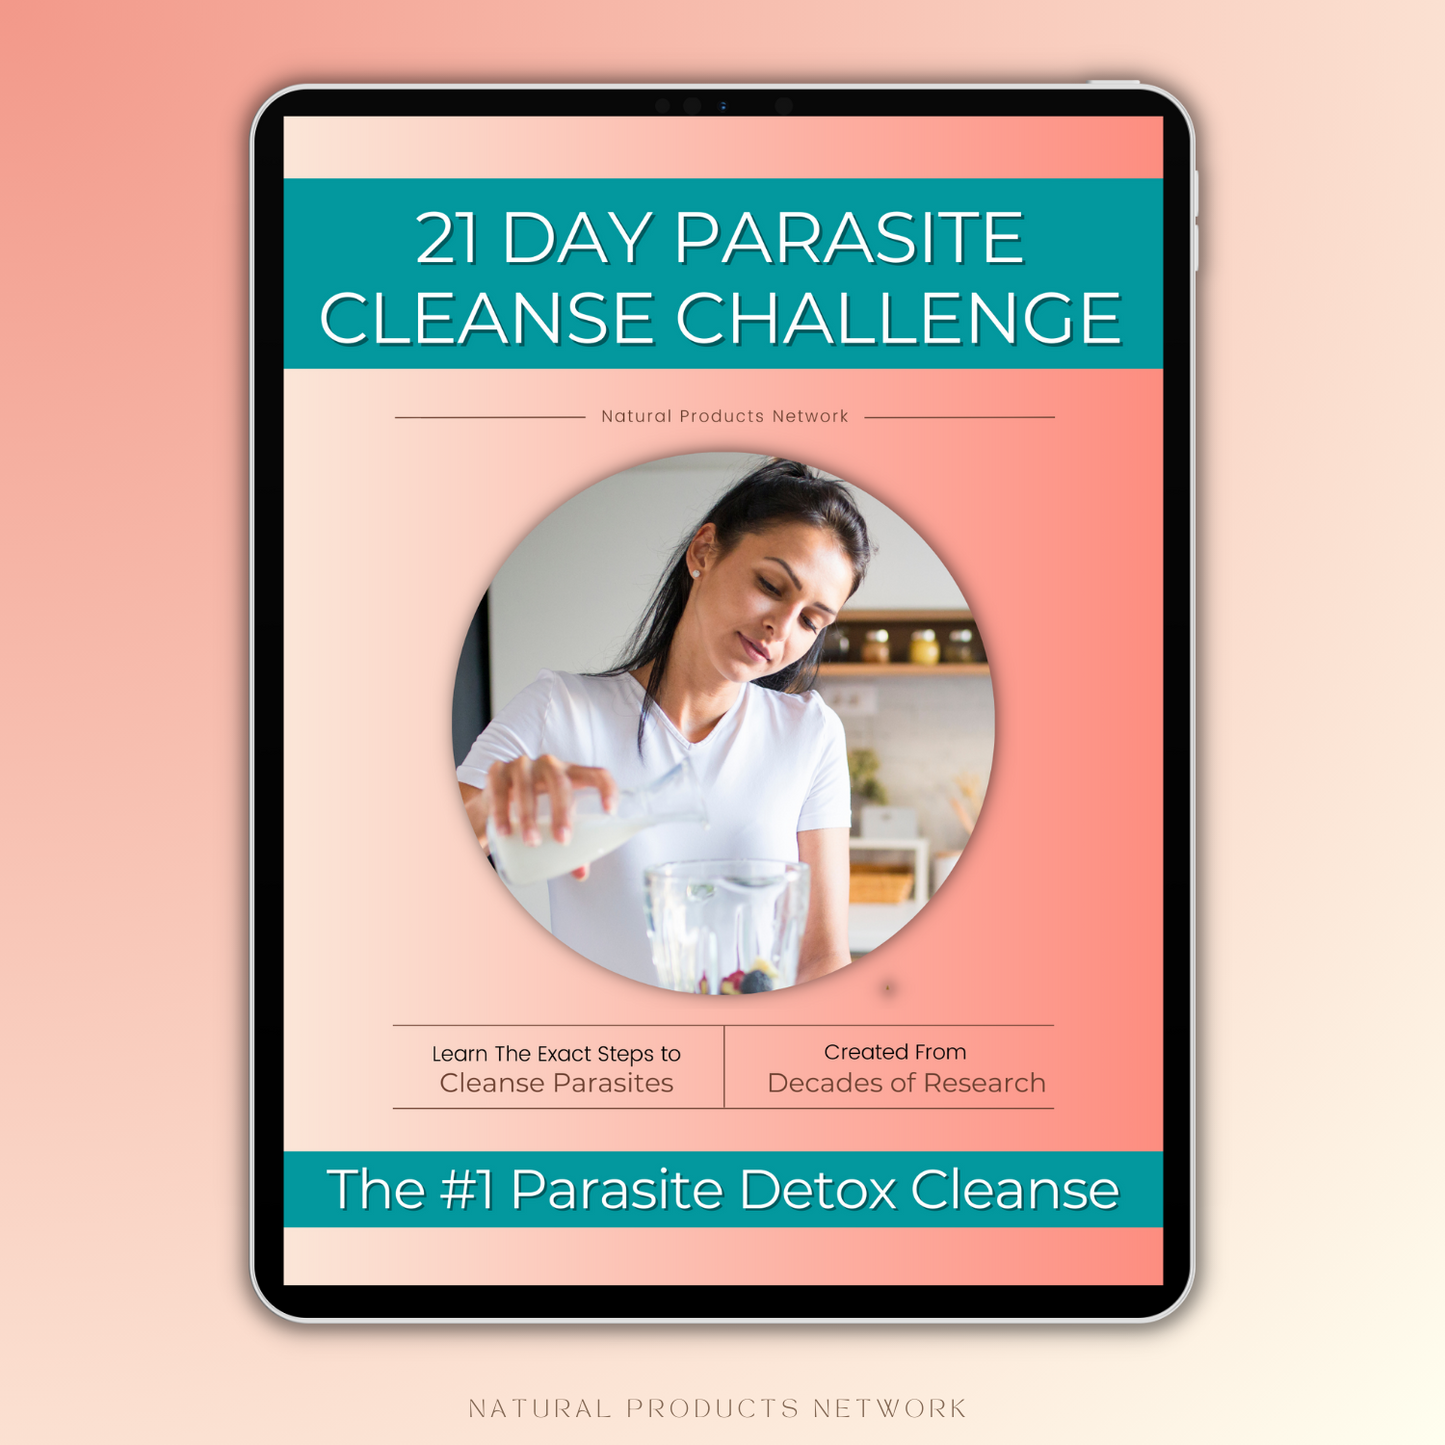 21 Day Parasite Cleanse Challenge